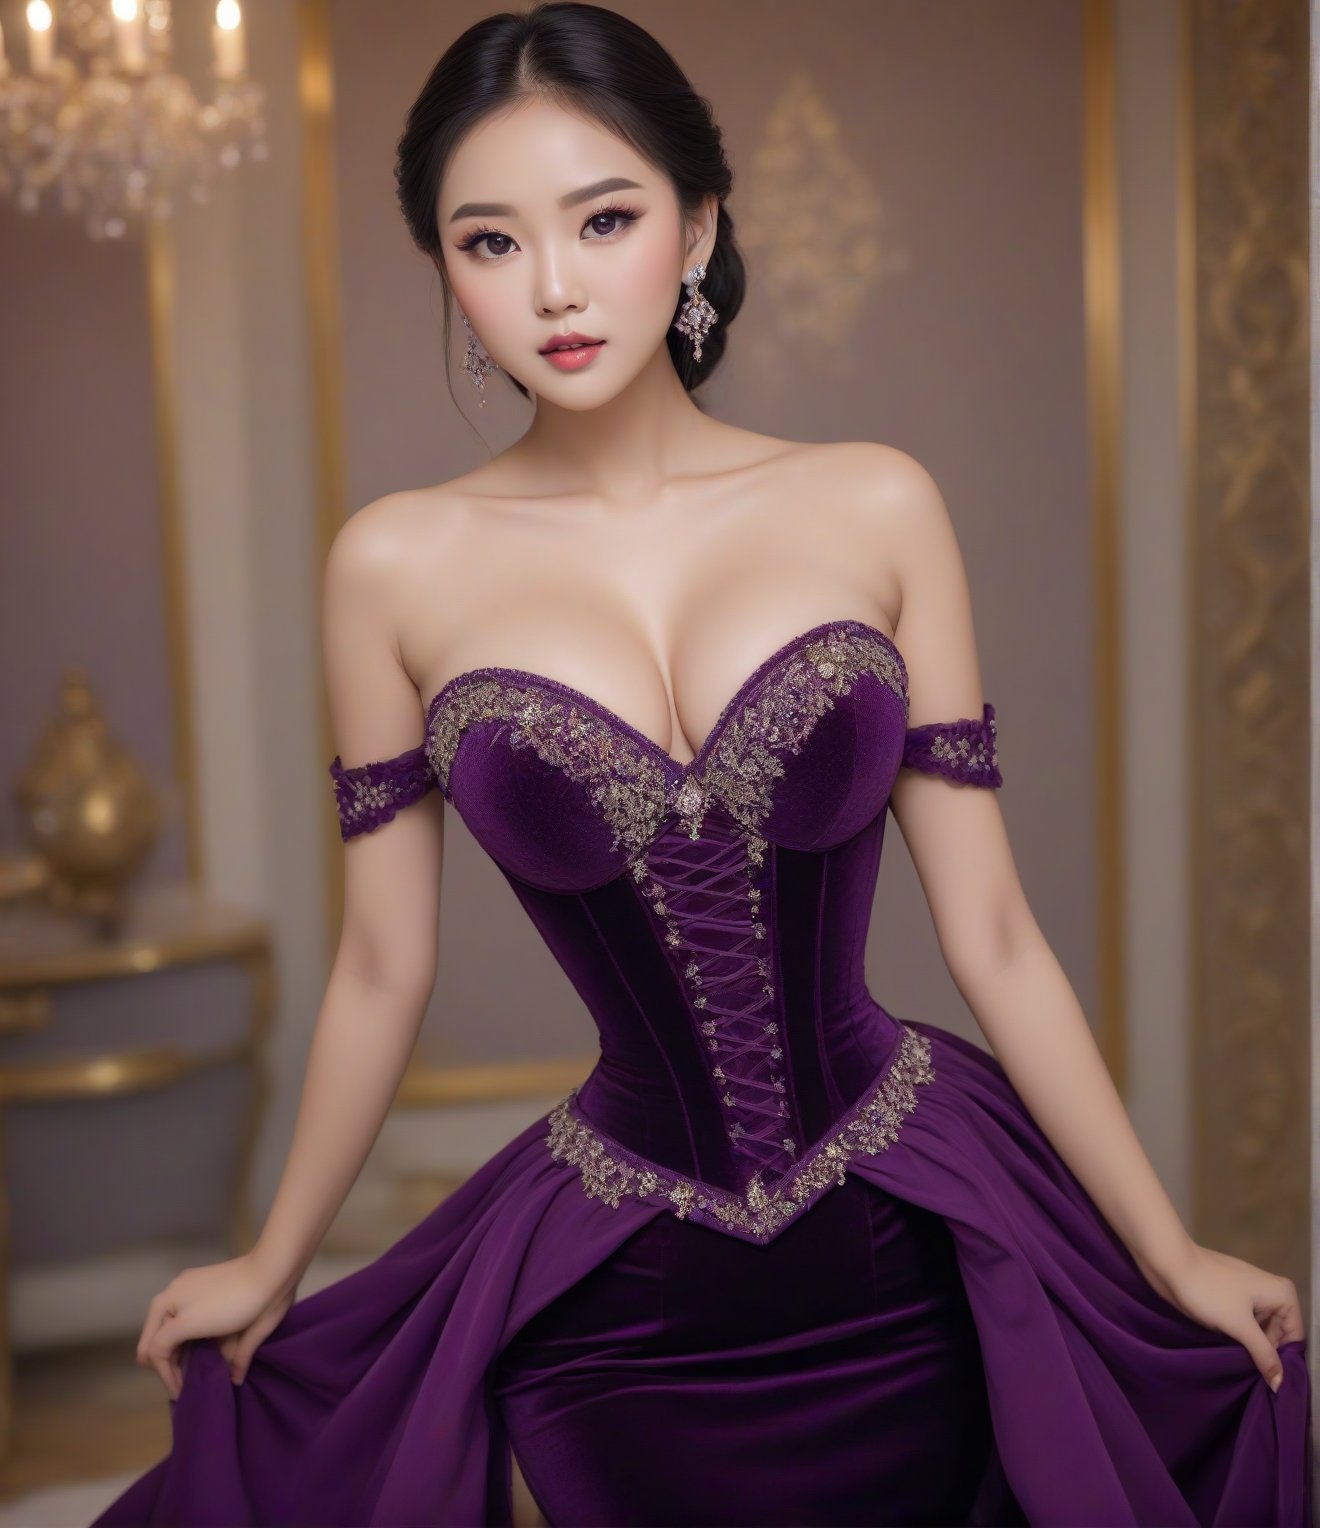 Masterpiece, 4K, ultra detailed, beautiful busty Asian lady with glamorous makeup, beautiful bright eyes and  glossy lips, dangling crystal earrings, tight corset, purple velvet dress with lace trimming, depth of field, SFW,WEARING HAUTE_COUTURE DESIGNER DRESS